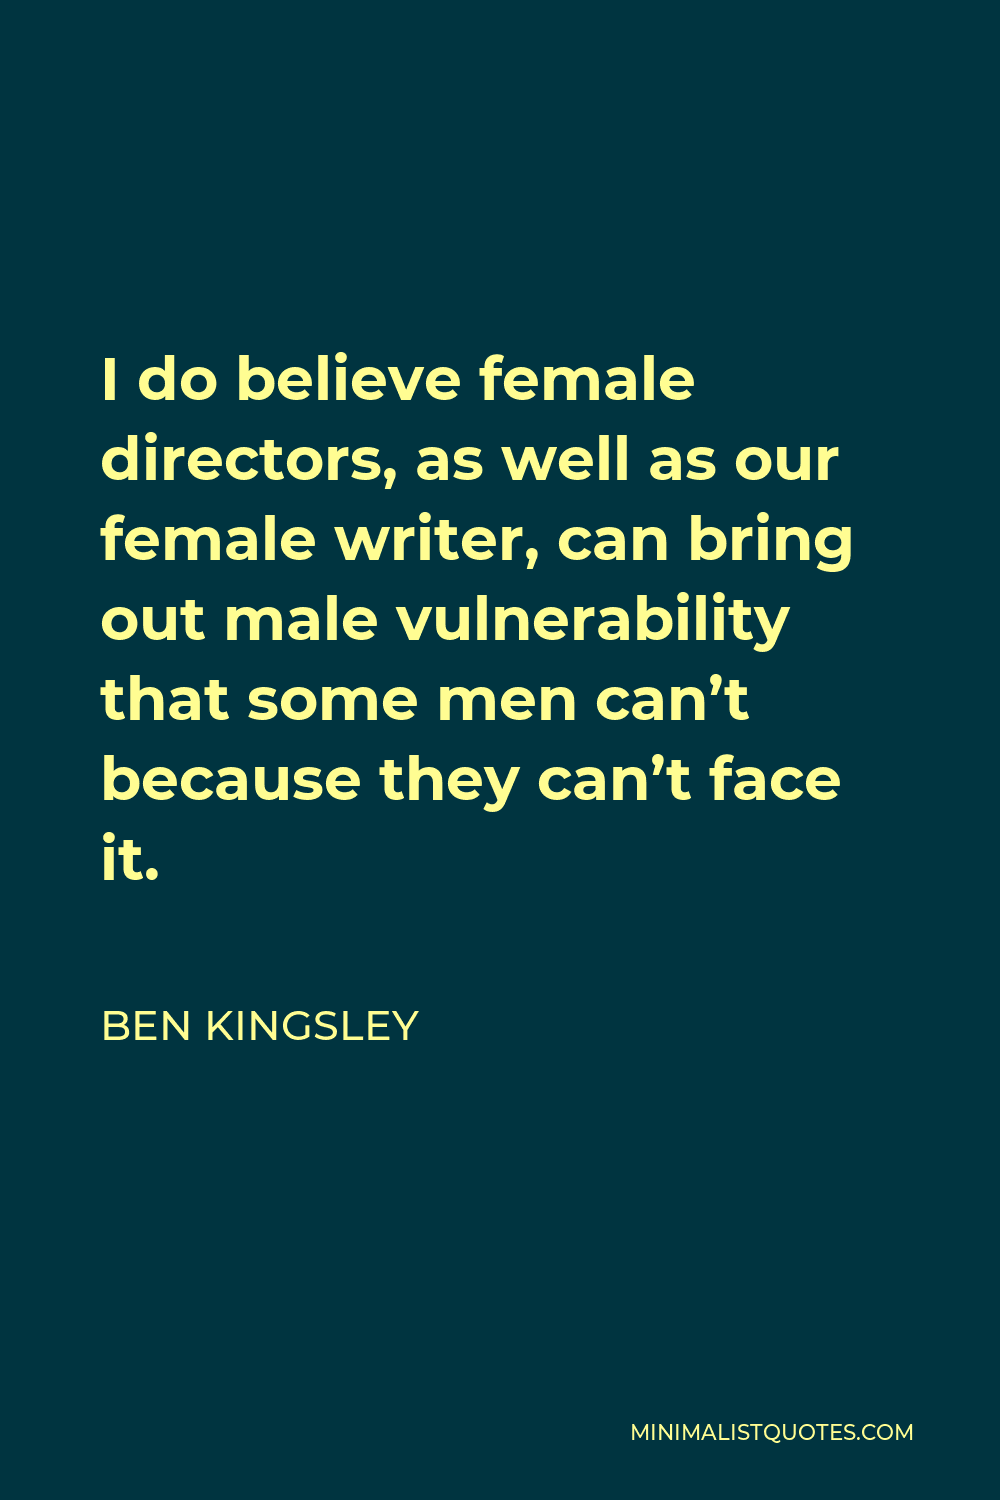 Ben Kingsley Quote - I do believe female directors, as well as our female writer, can bring out male vulnerability that some men can’t because they can’t face it.